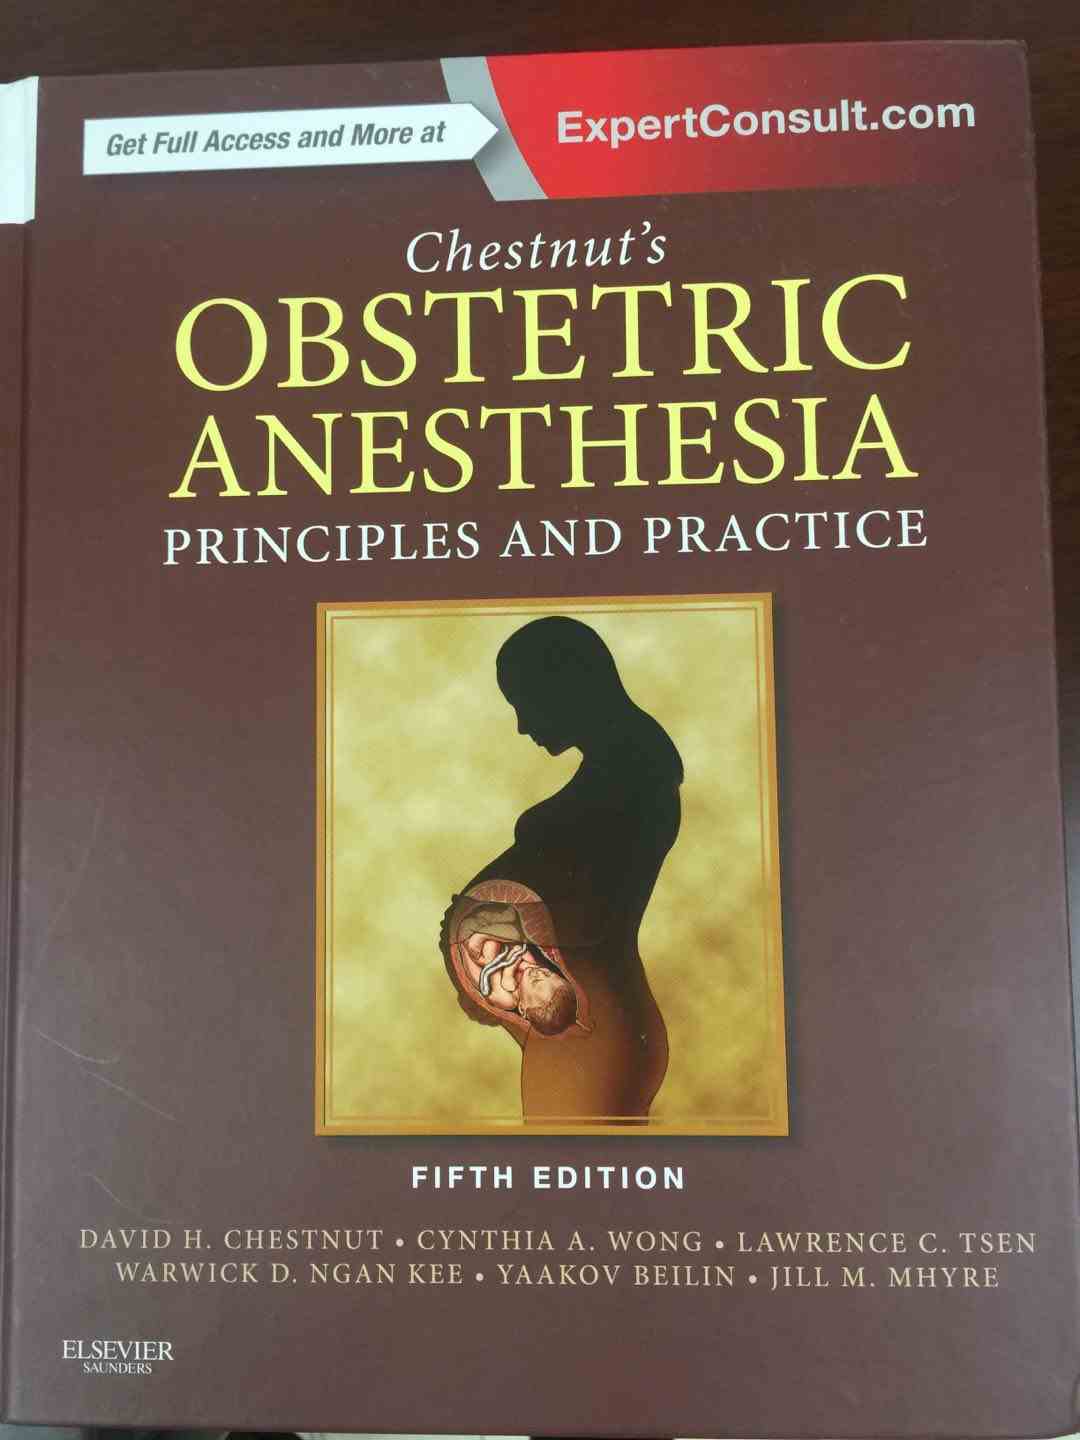  《Chestnut's Obstetric Anesthesia: Principles and Practice》                                                                       